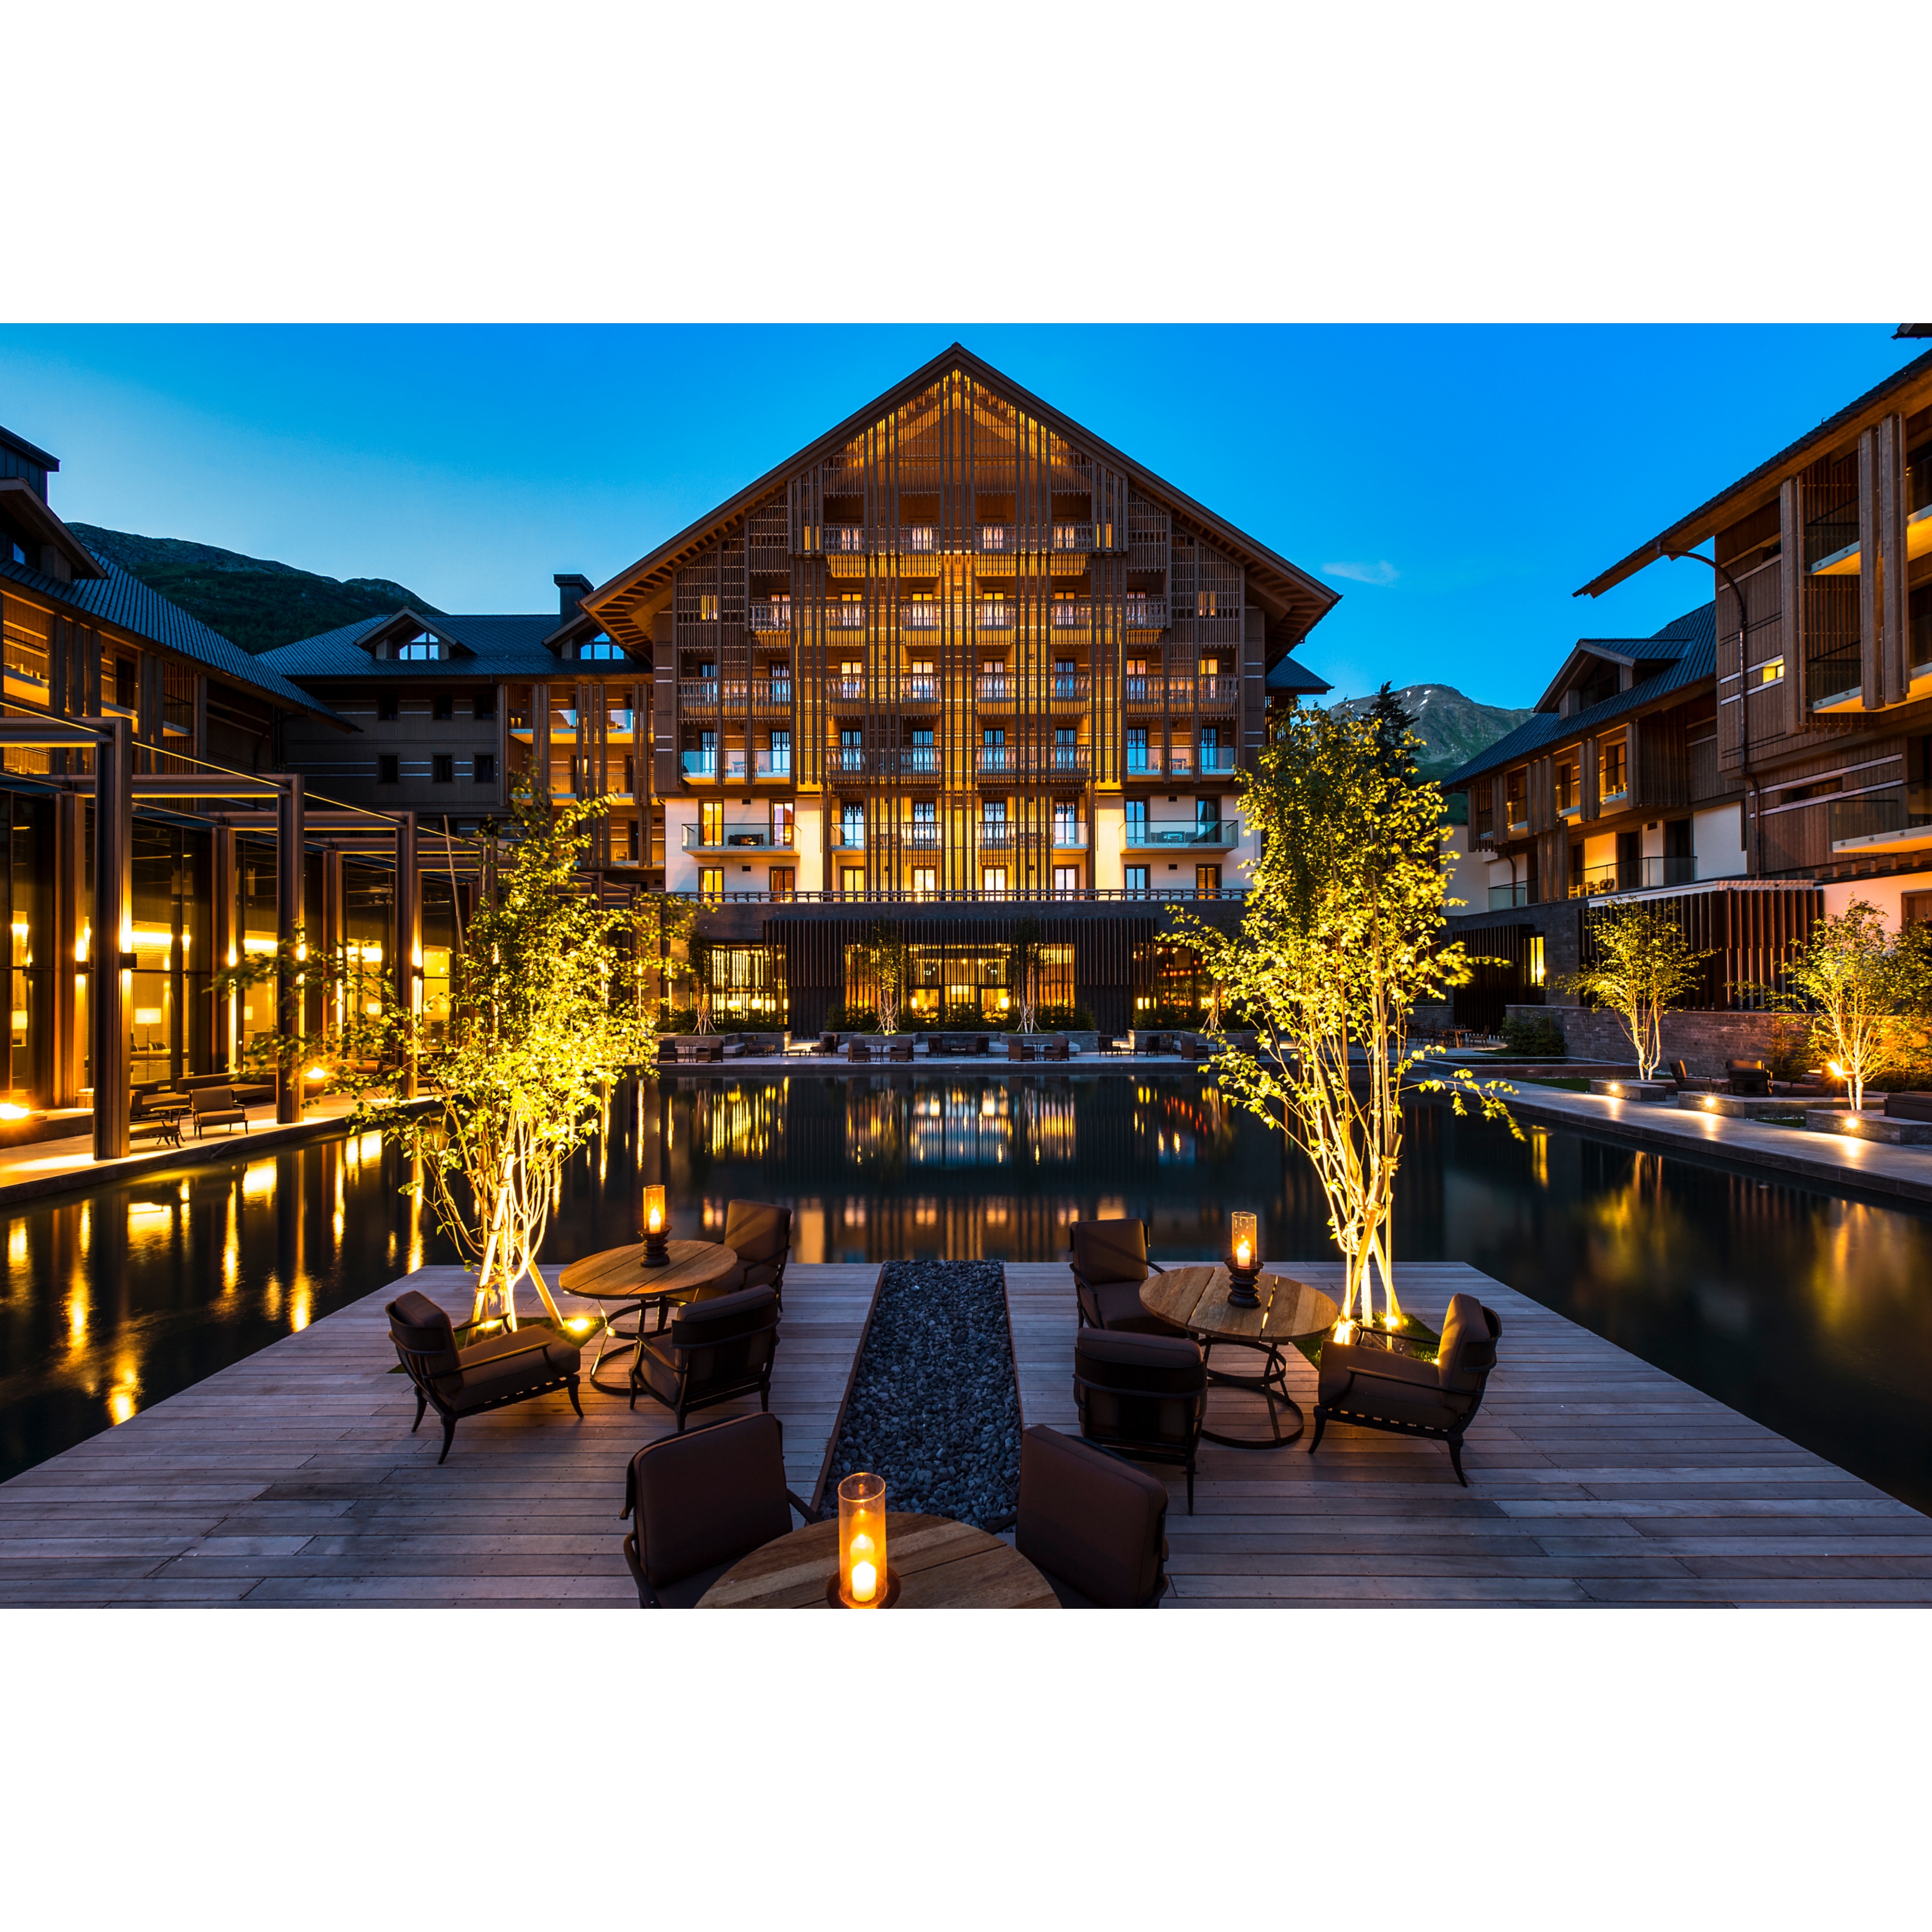 The Chedi Andermatt pool terrace overlooking the main house on a balmy summer evening.